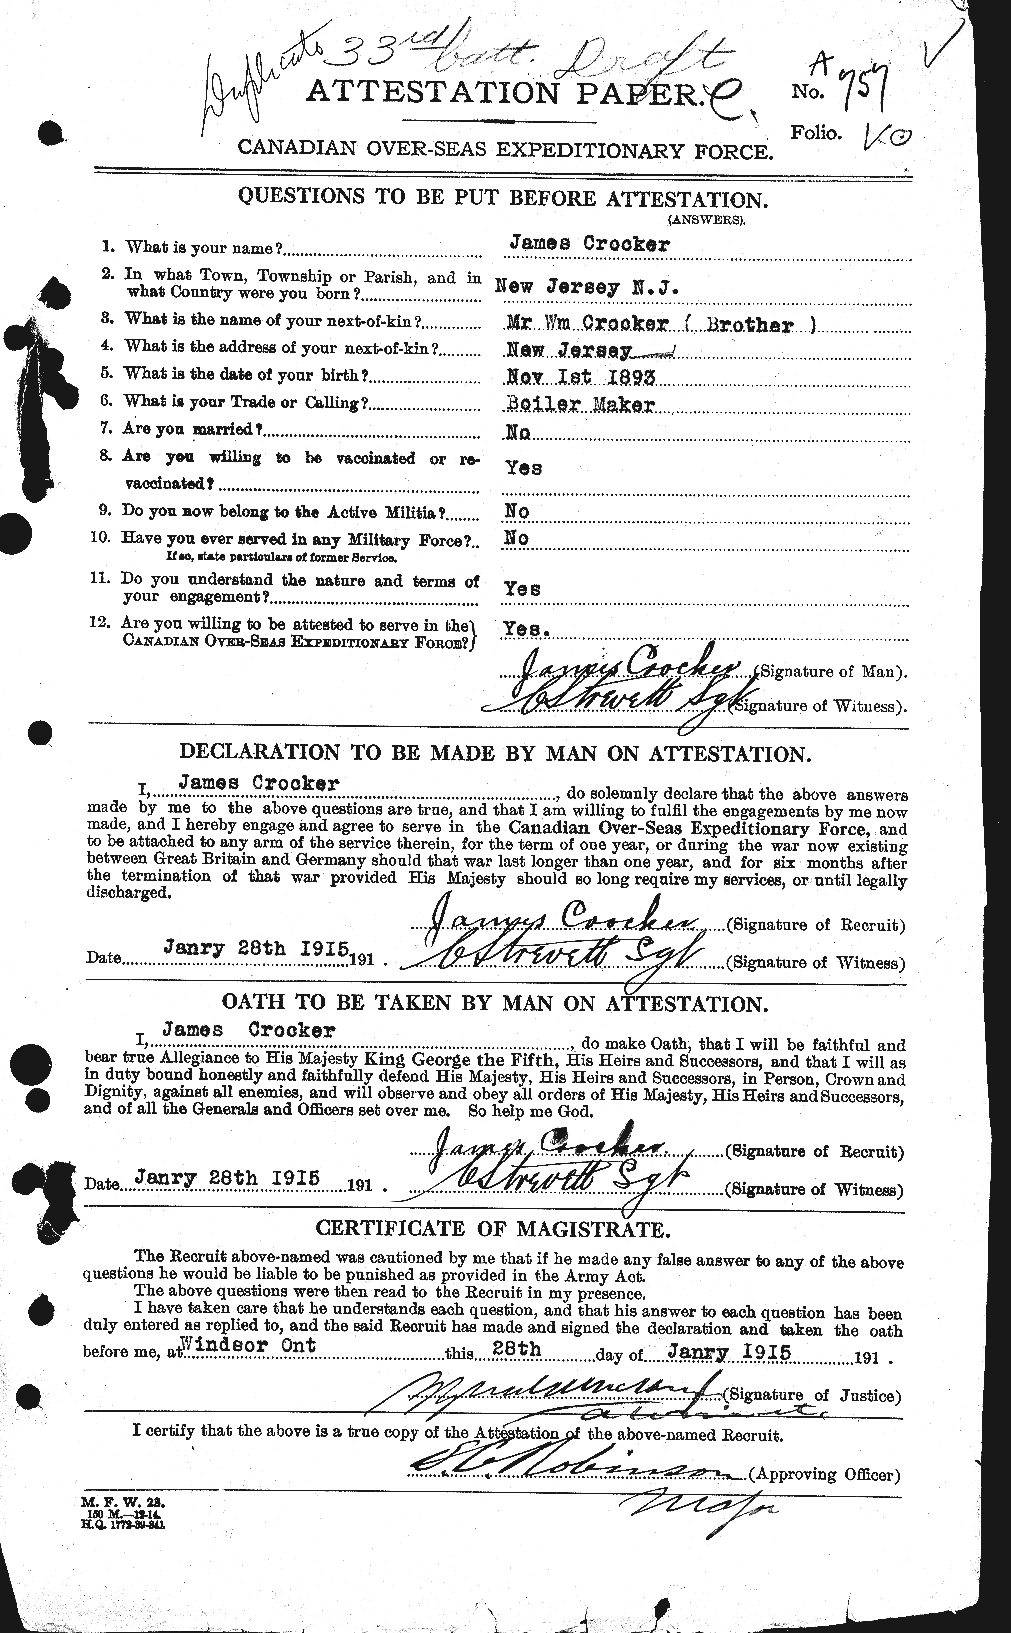 Personnel Records of the First World War - CEF 064771a